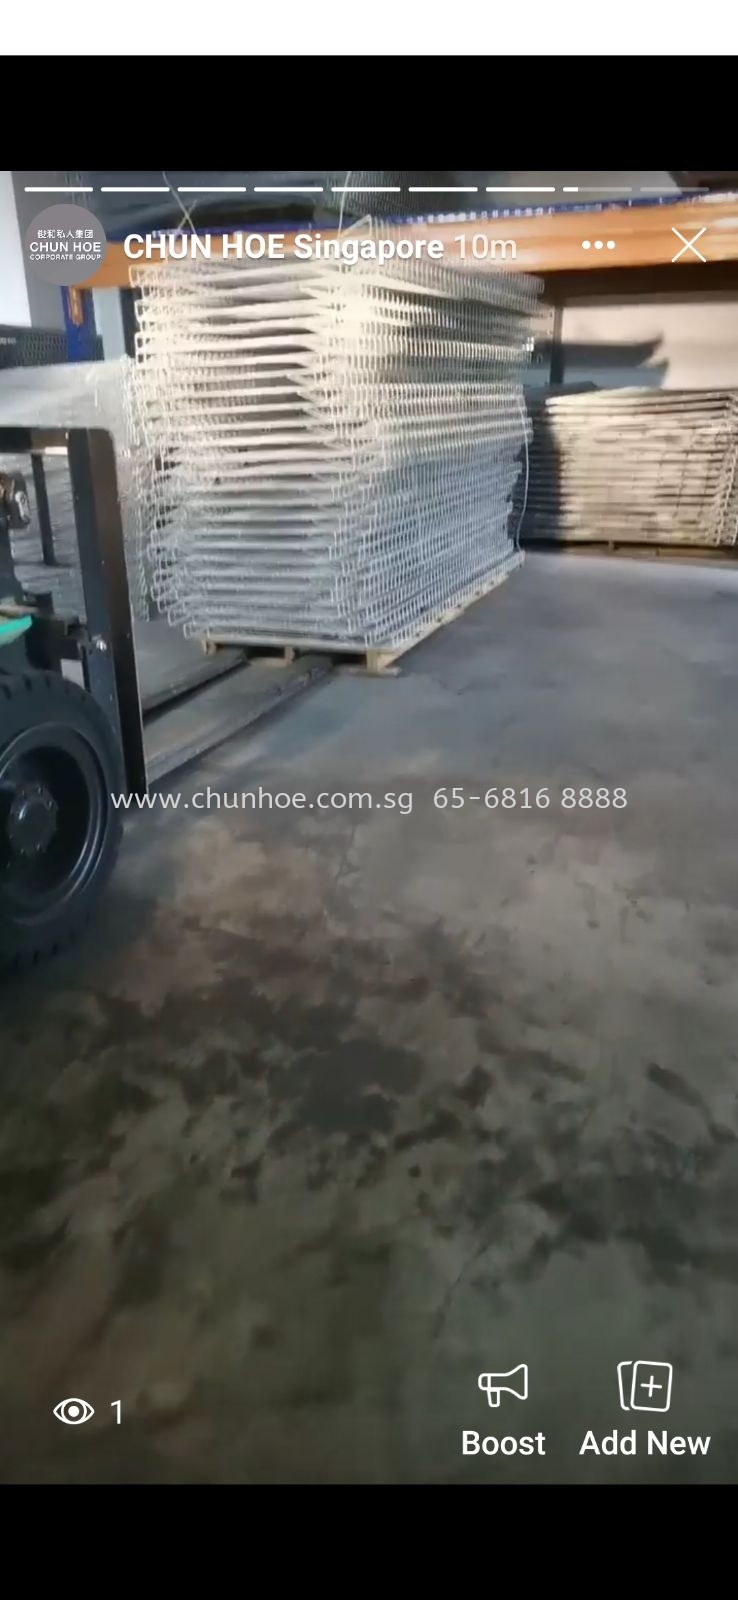 Singapore High Security BRC Fence Construction Hardware Material